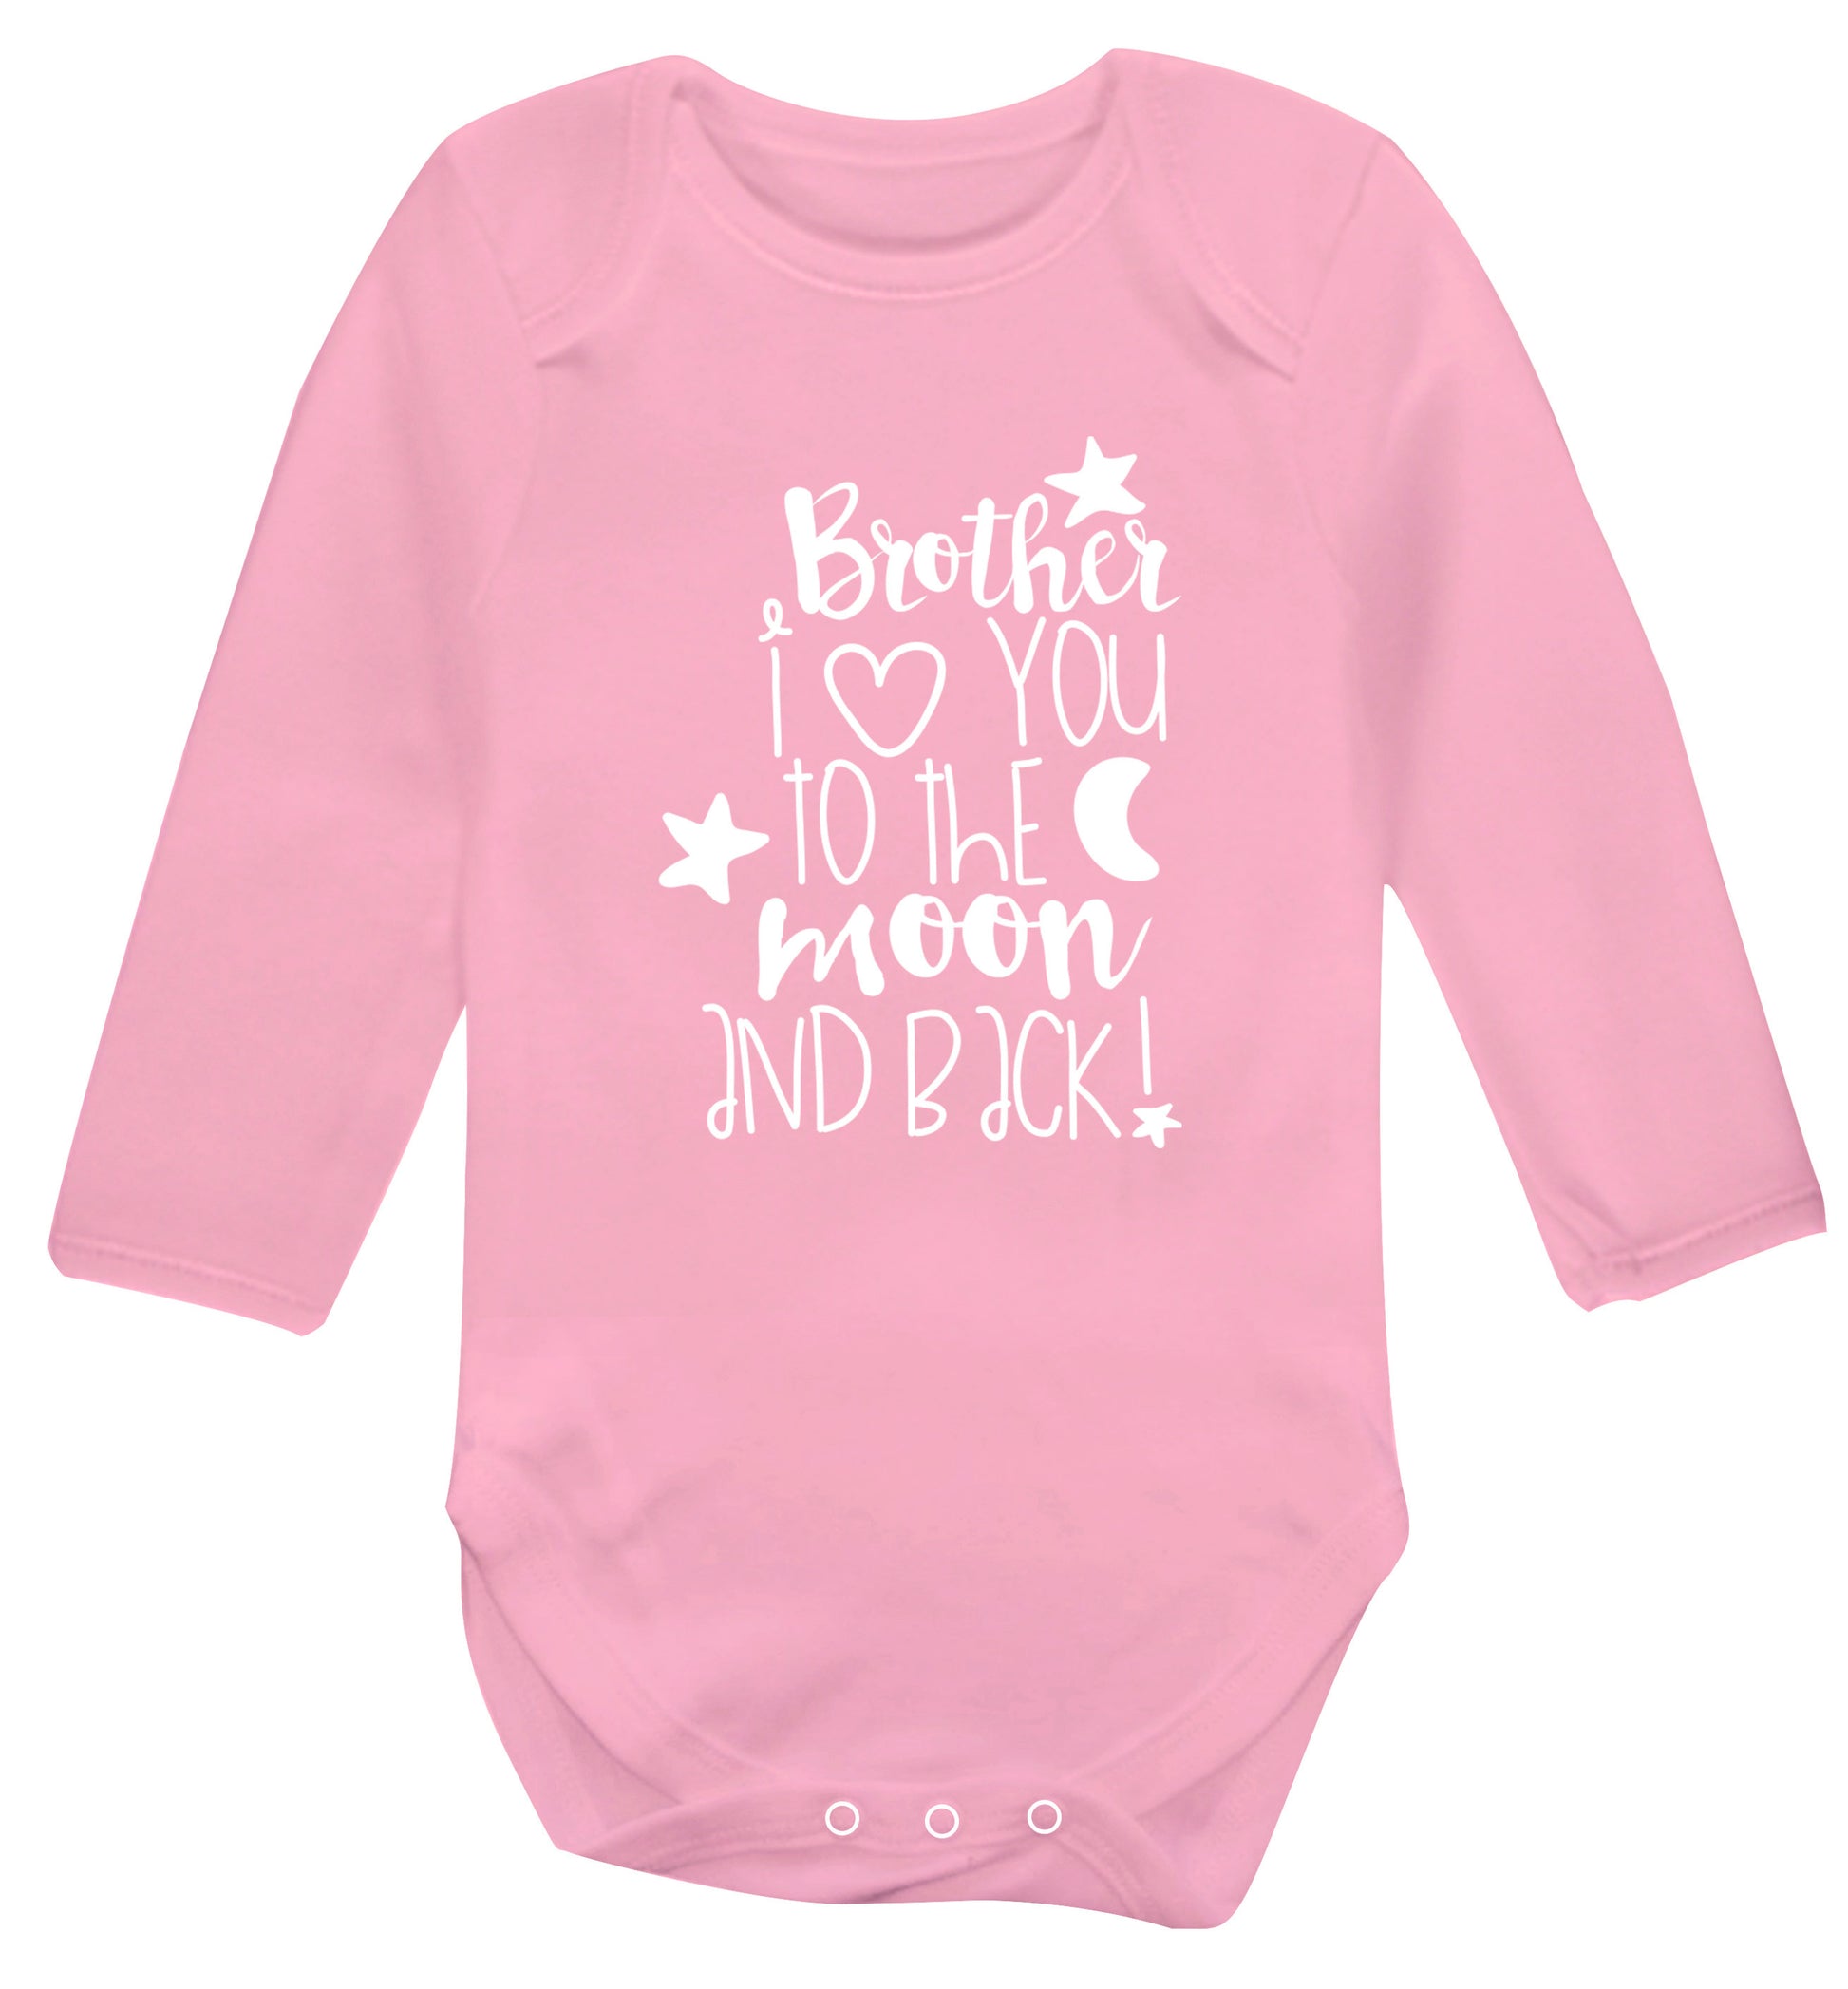 Brother I love you to the moon and back Baby Vest long sleeved pale pink 6-12 months